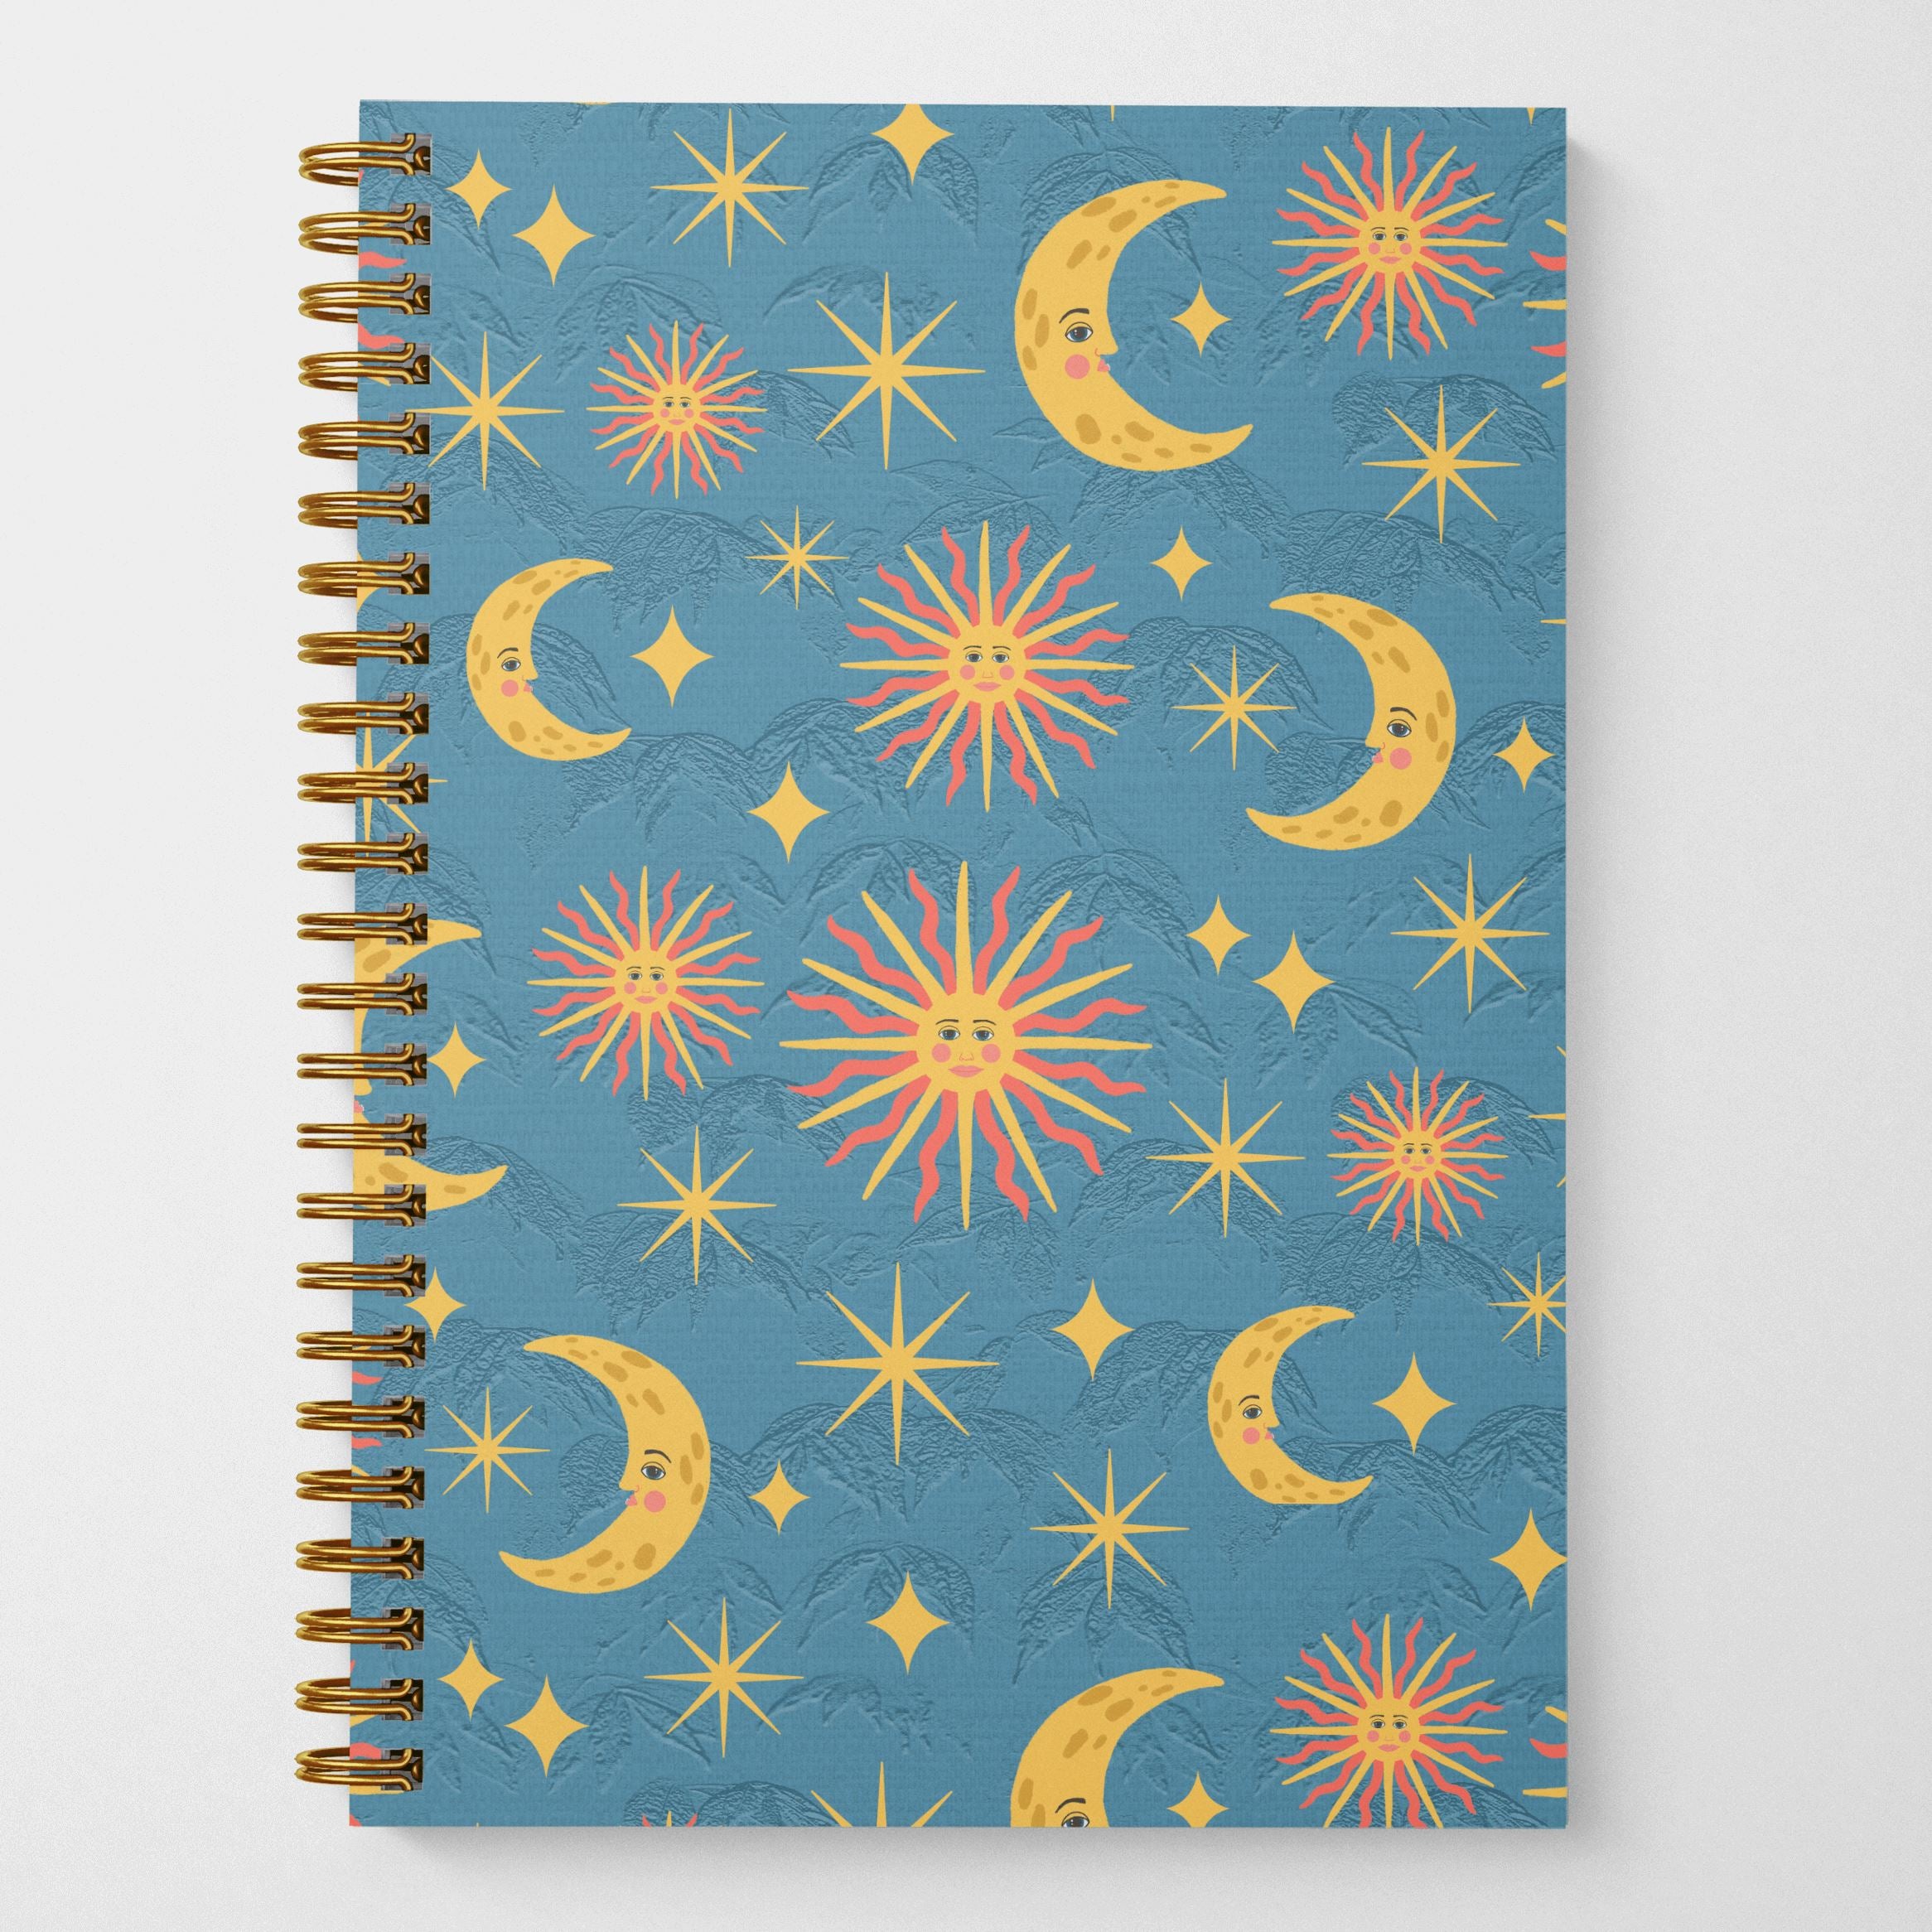 An eco friendly 8.5 x 5.5 inch wire spiral bound notebook with 120 lined pages featuring hand illustrated suns, moons, and stars pattern on a blue background on the cover.